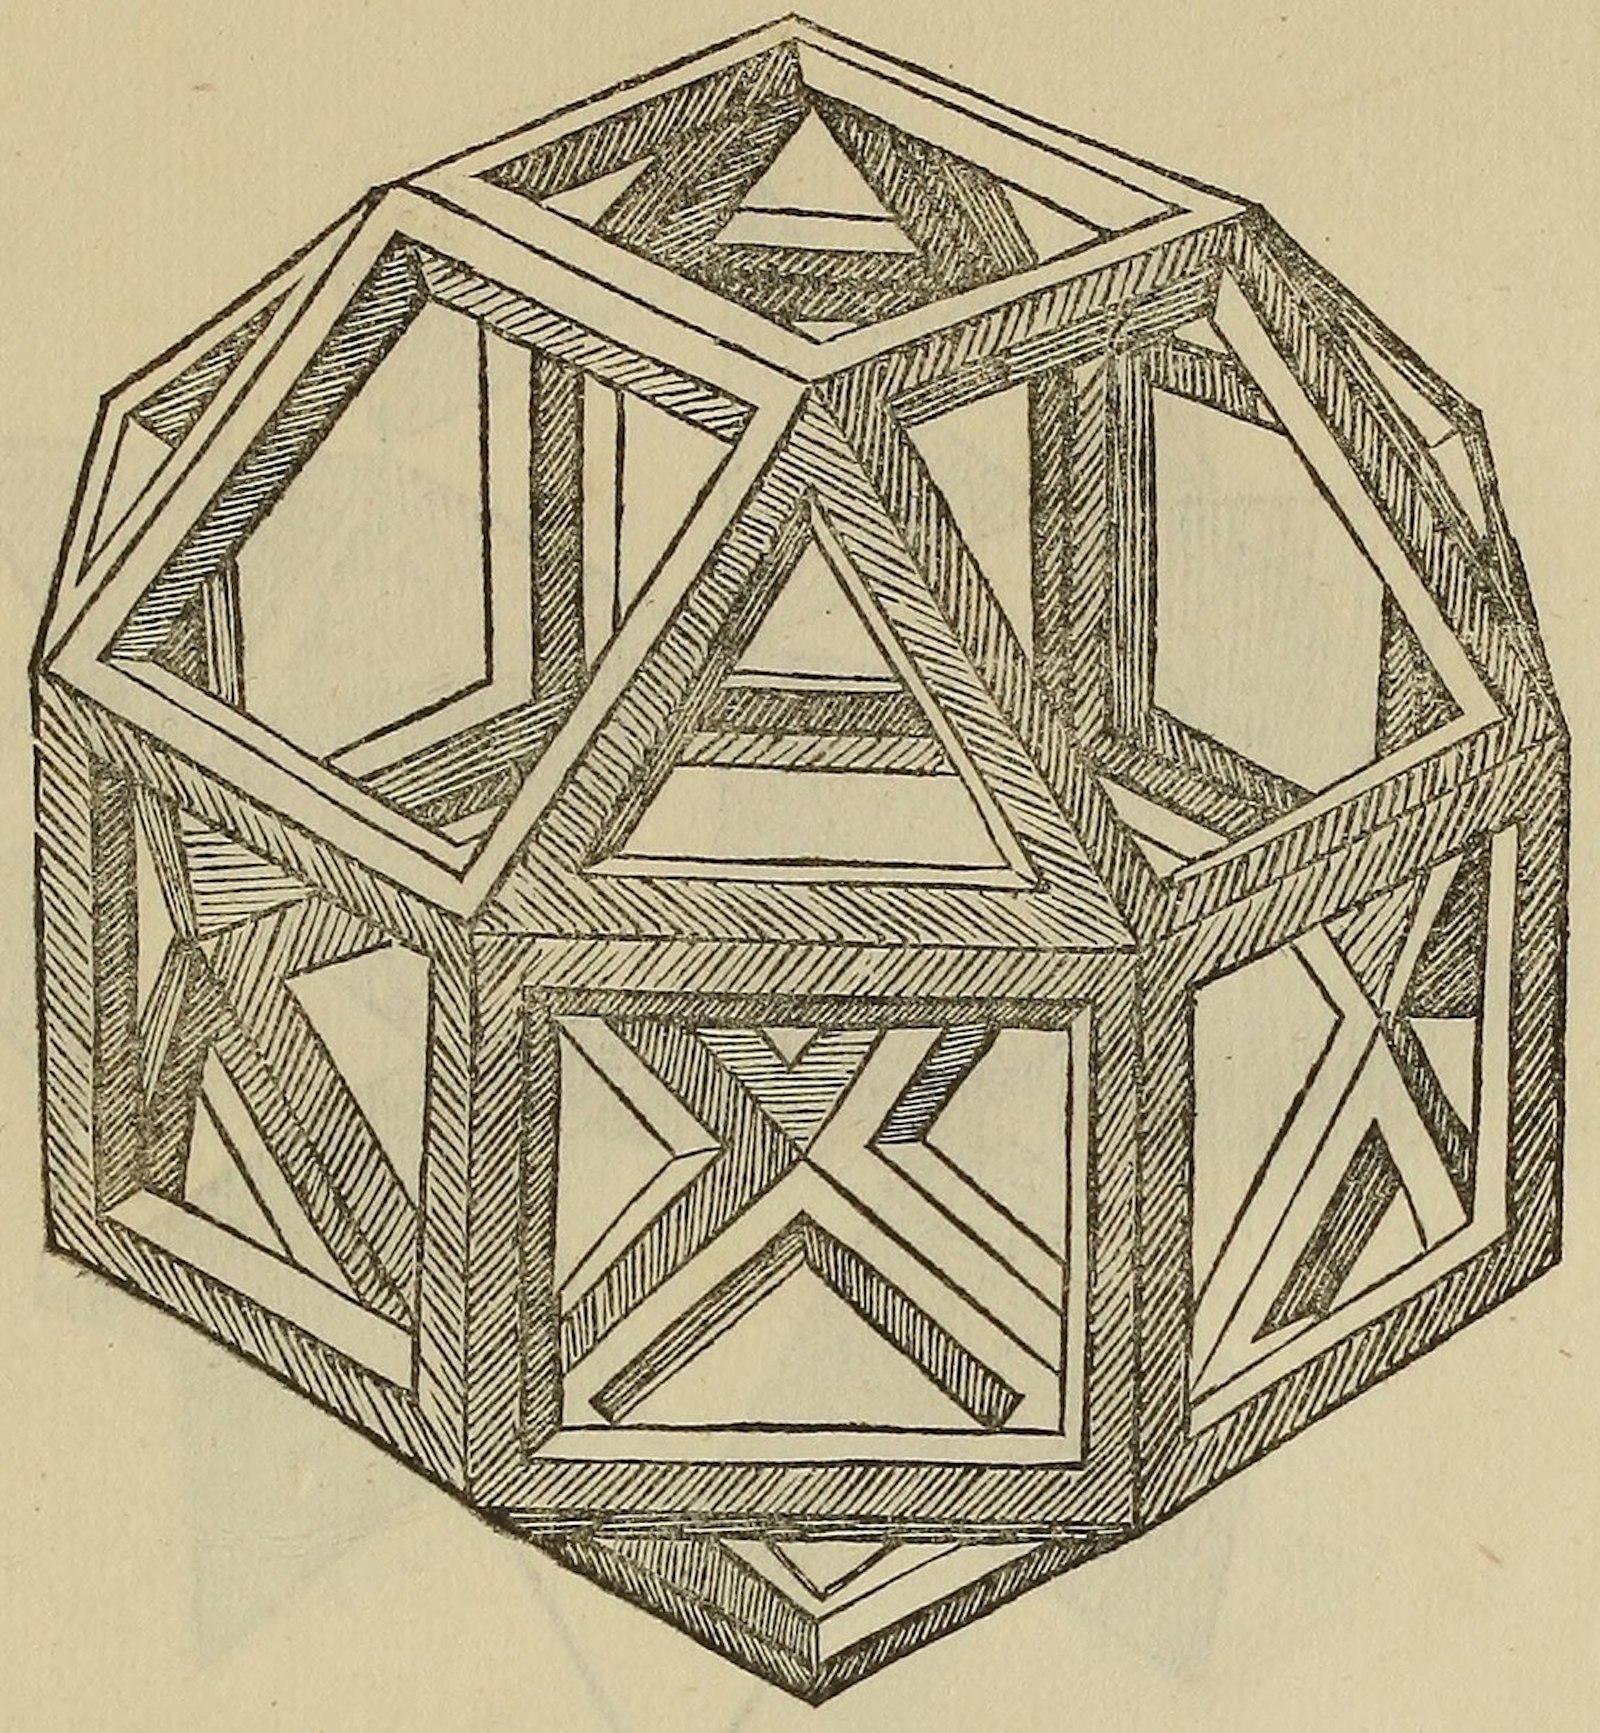 Geometric shape rendered as though it was constructed with bars in a hollow, cage-like fashion. 